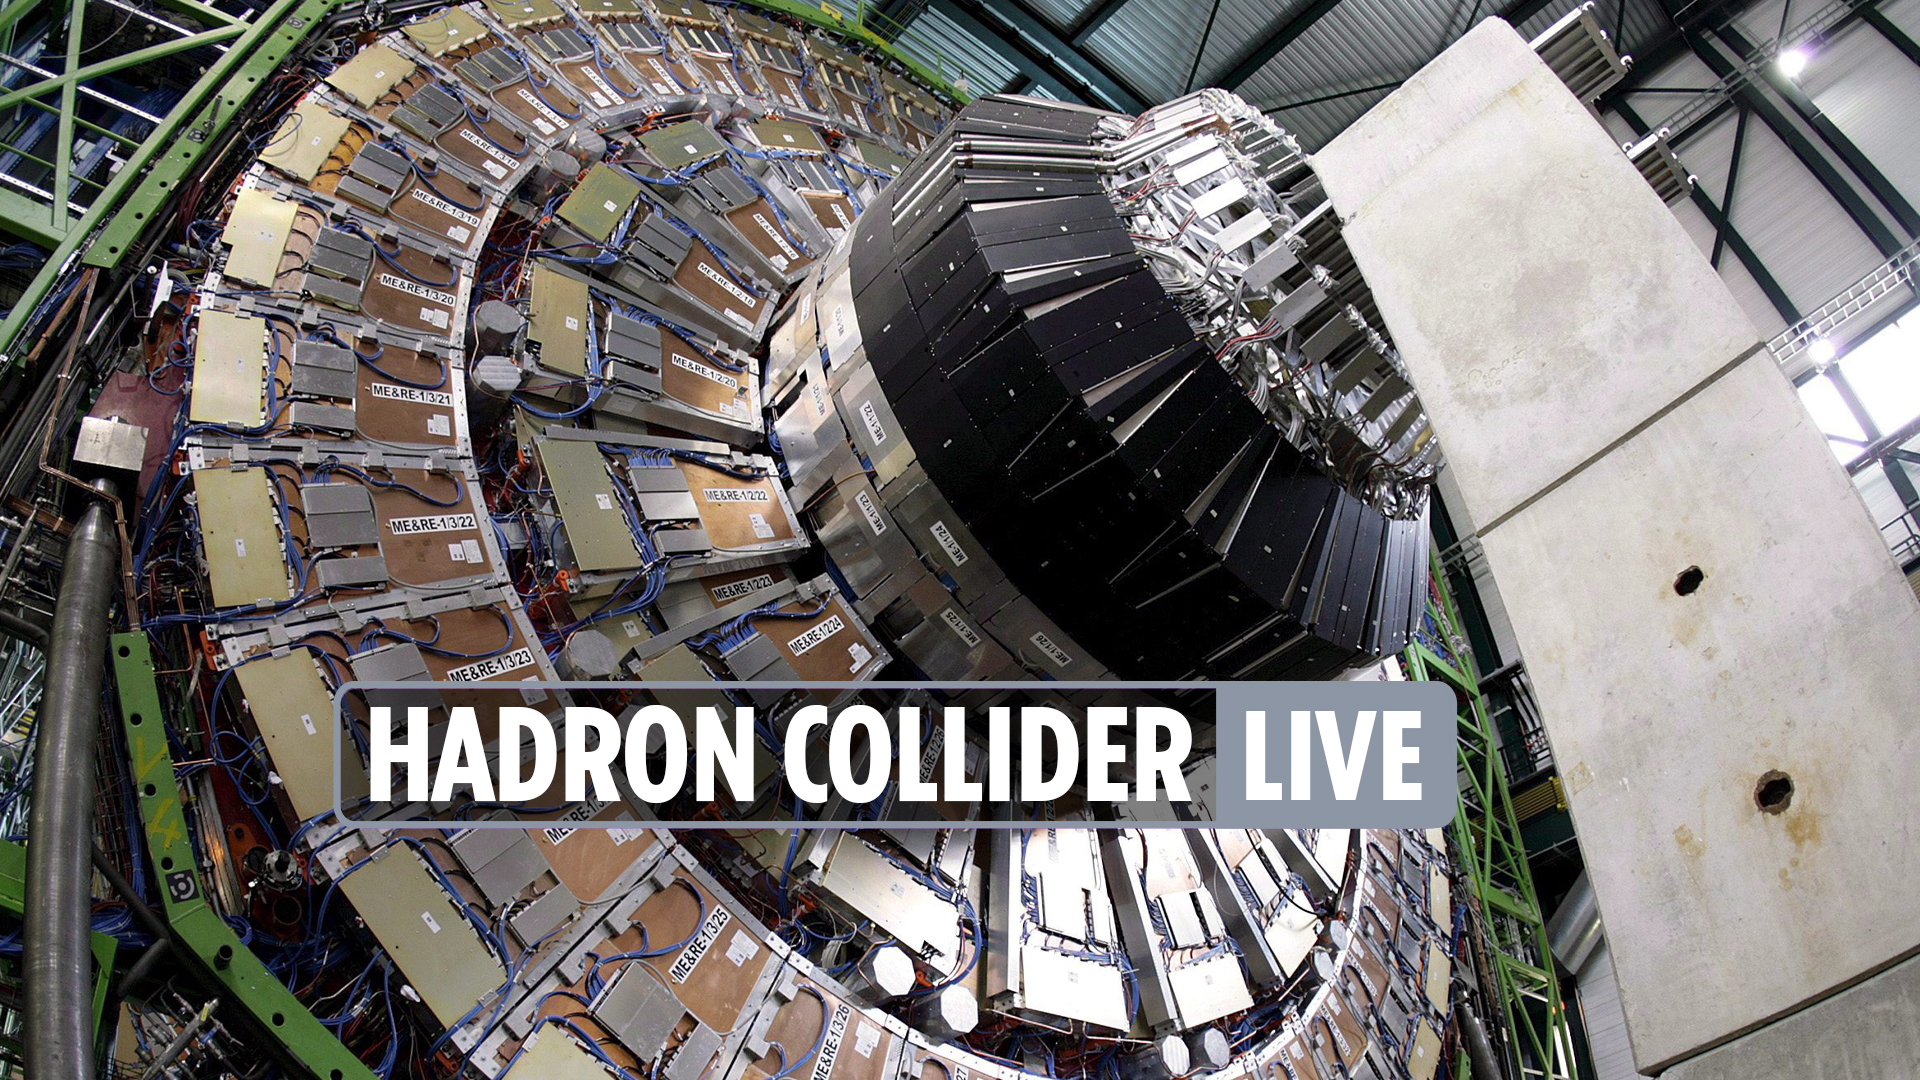 CERN’s July 5th test LIVE — Large Hadron Collider officially opened today with new particles already being discovered